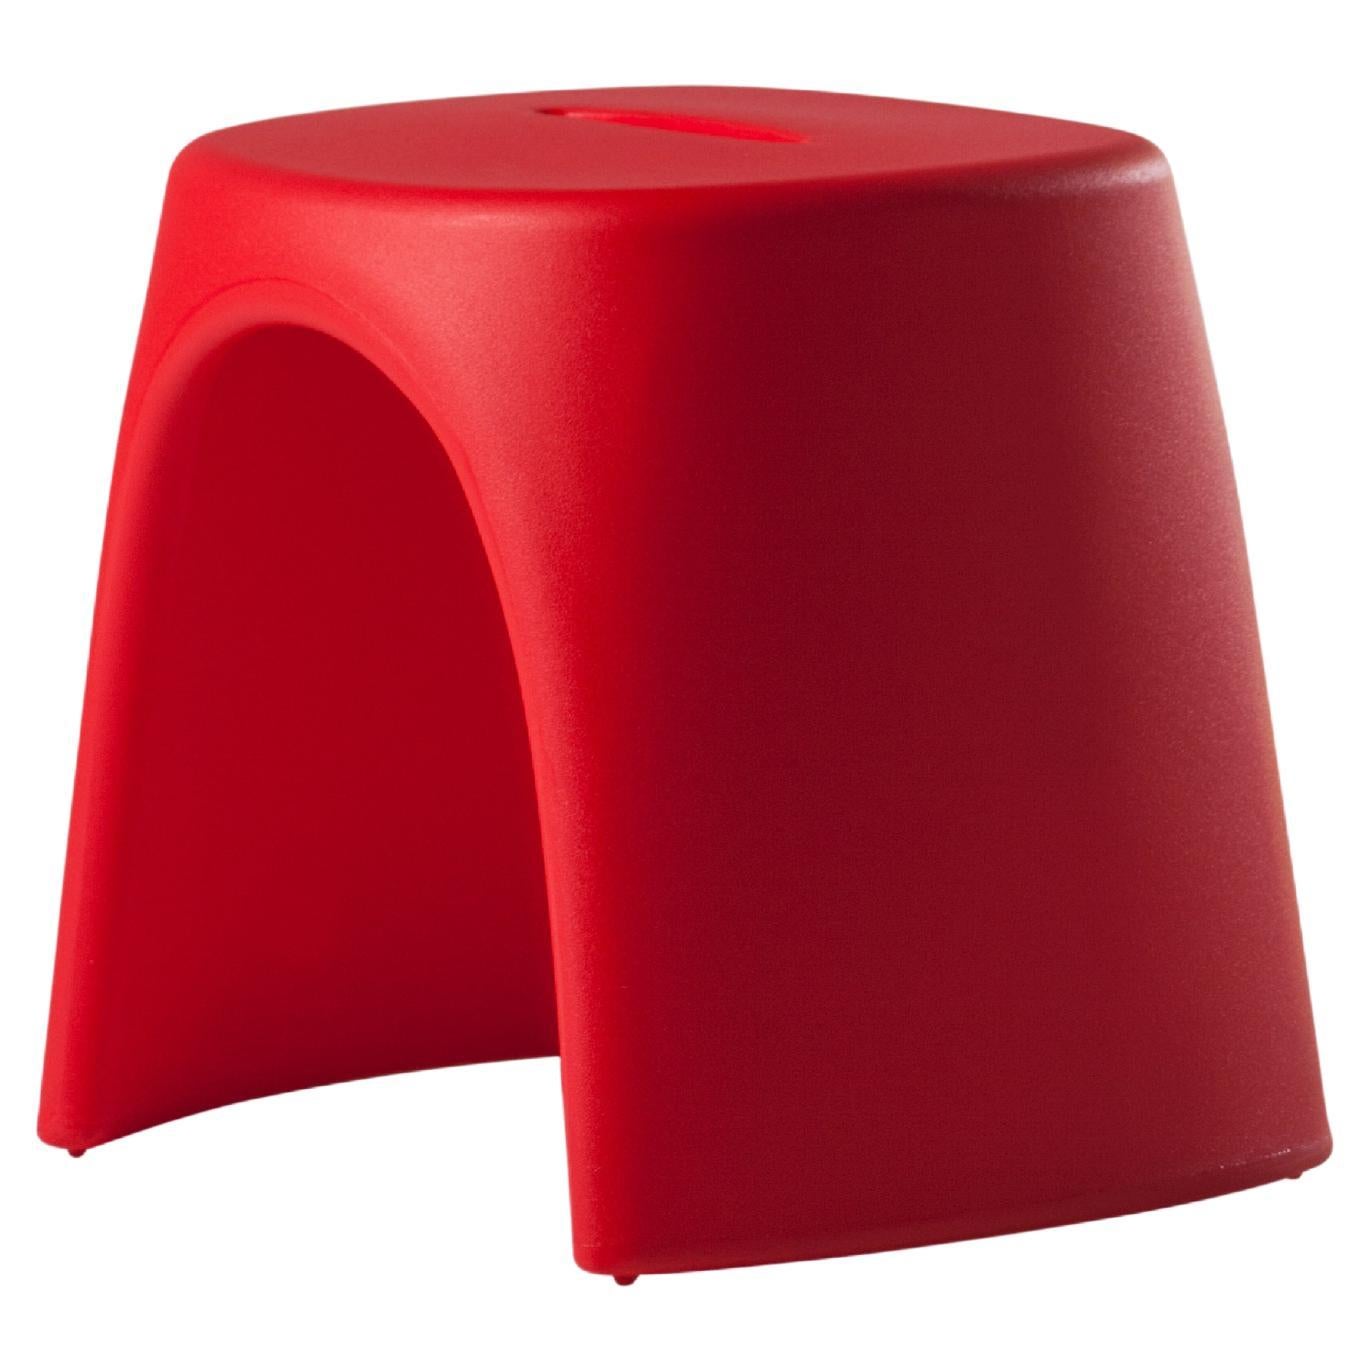 Slide Design Amélie Sgabello Stool in Flame Red by Italo Pertichini For Sale